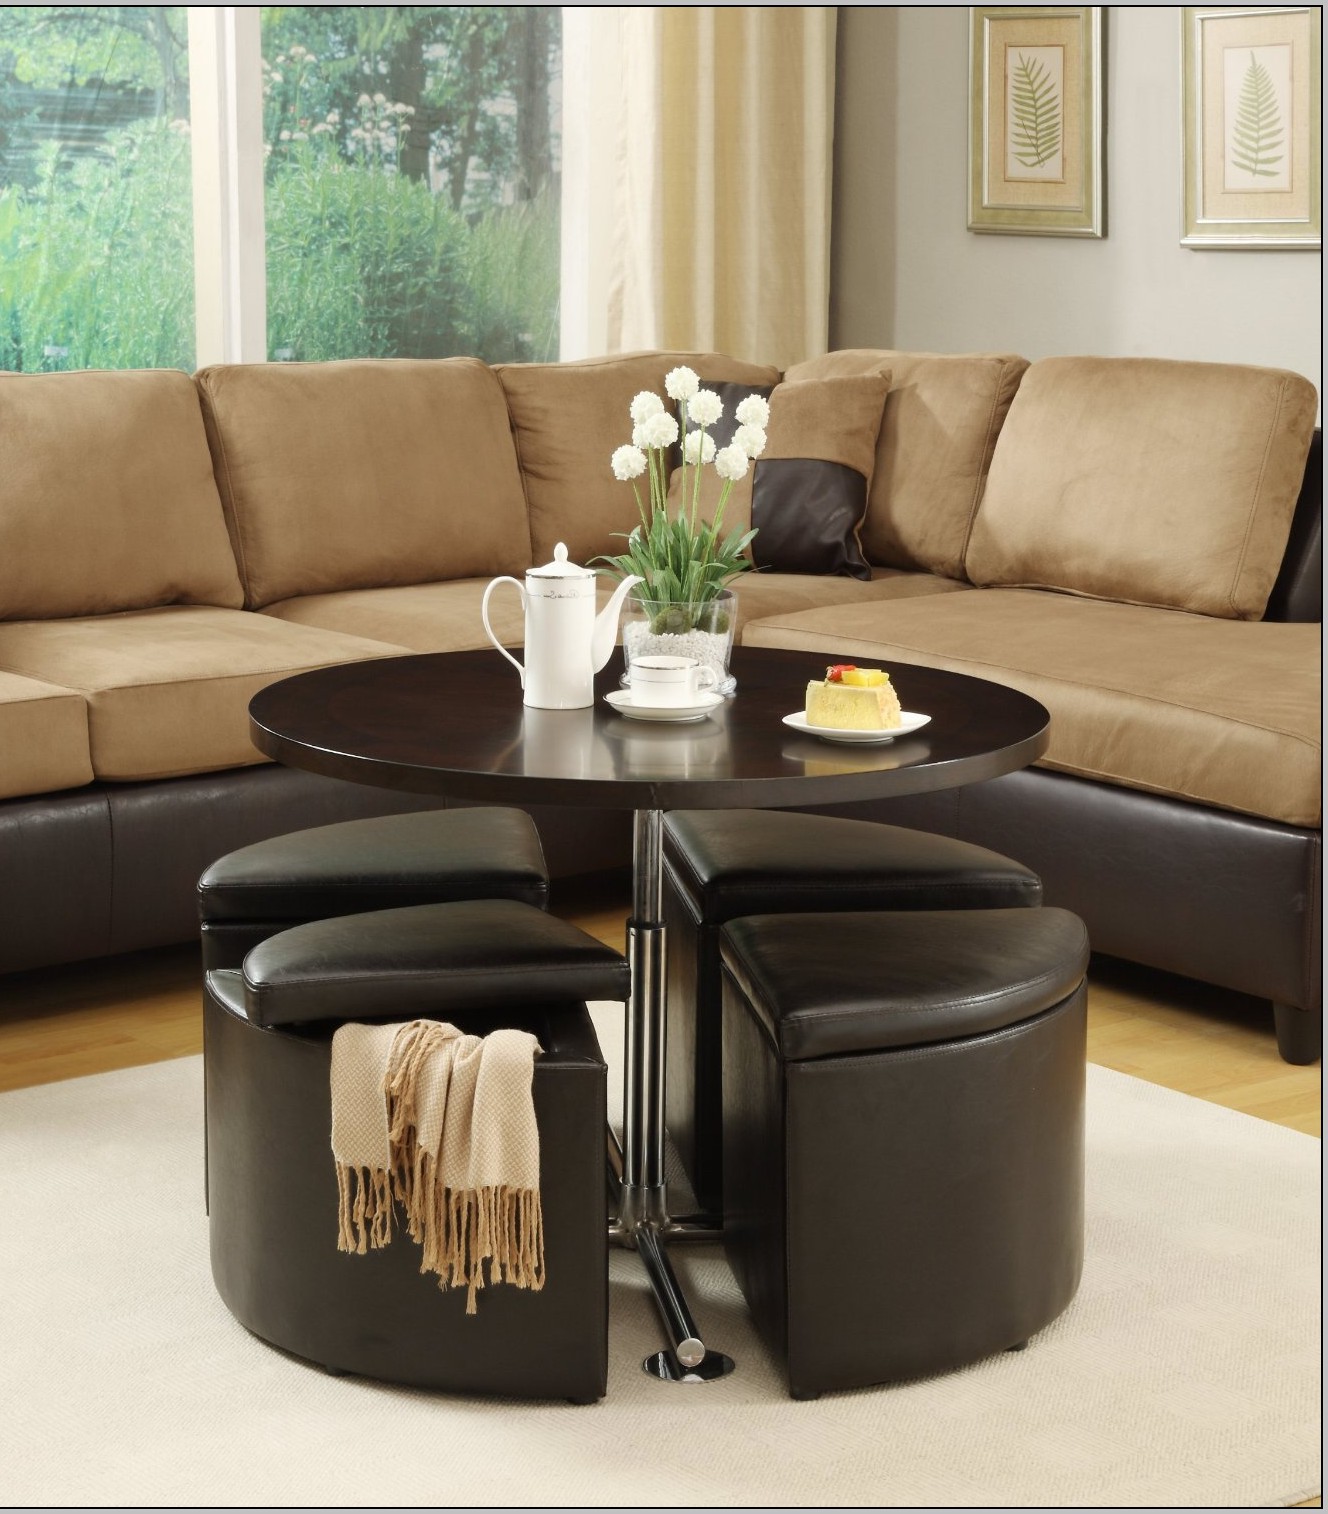 Round Coffee Table With Seats Underneath | Roy Home Design